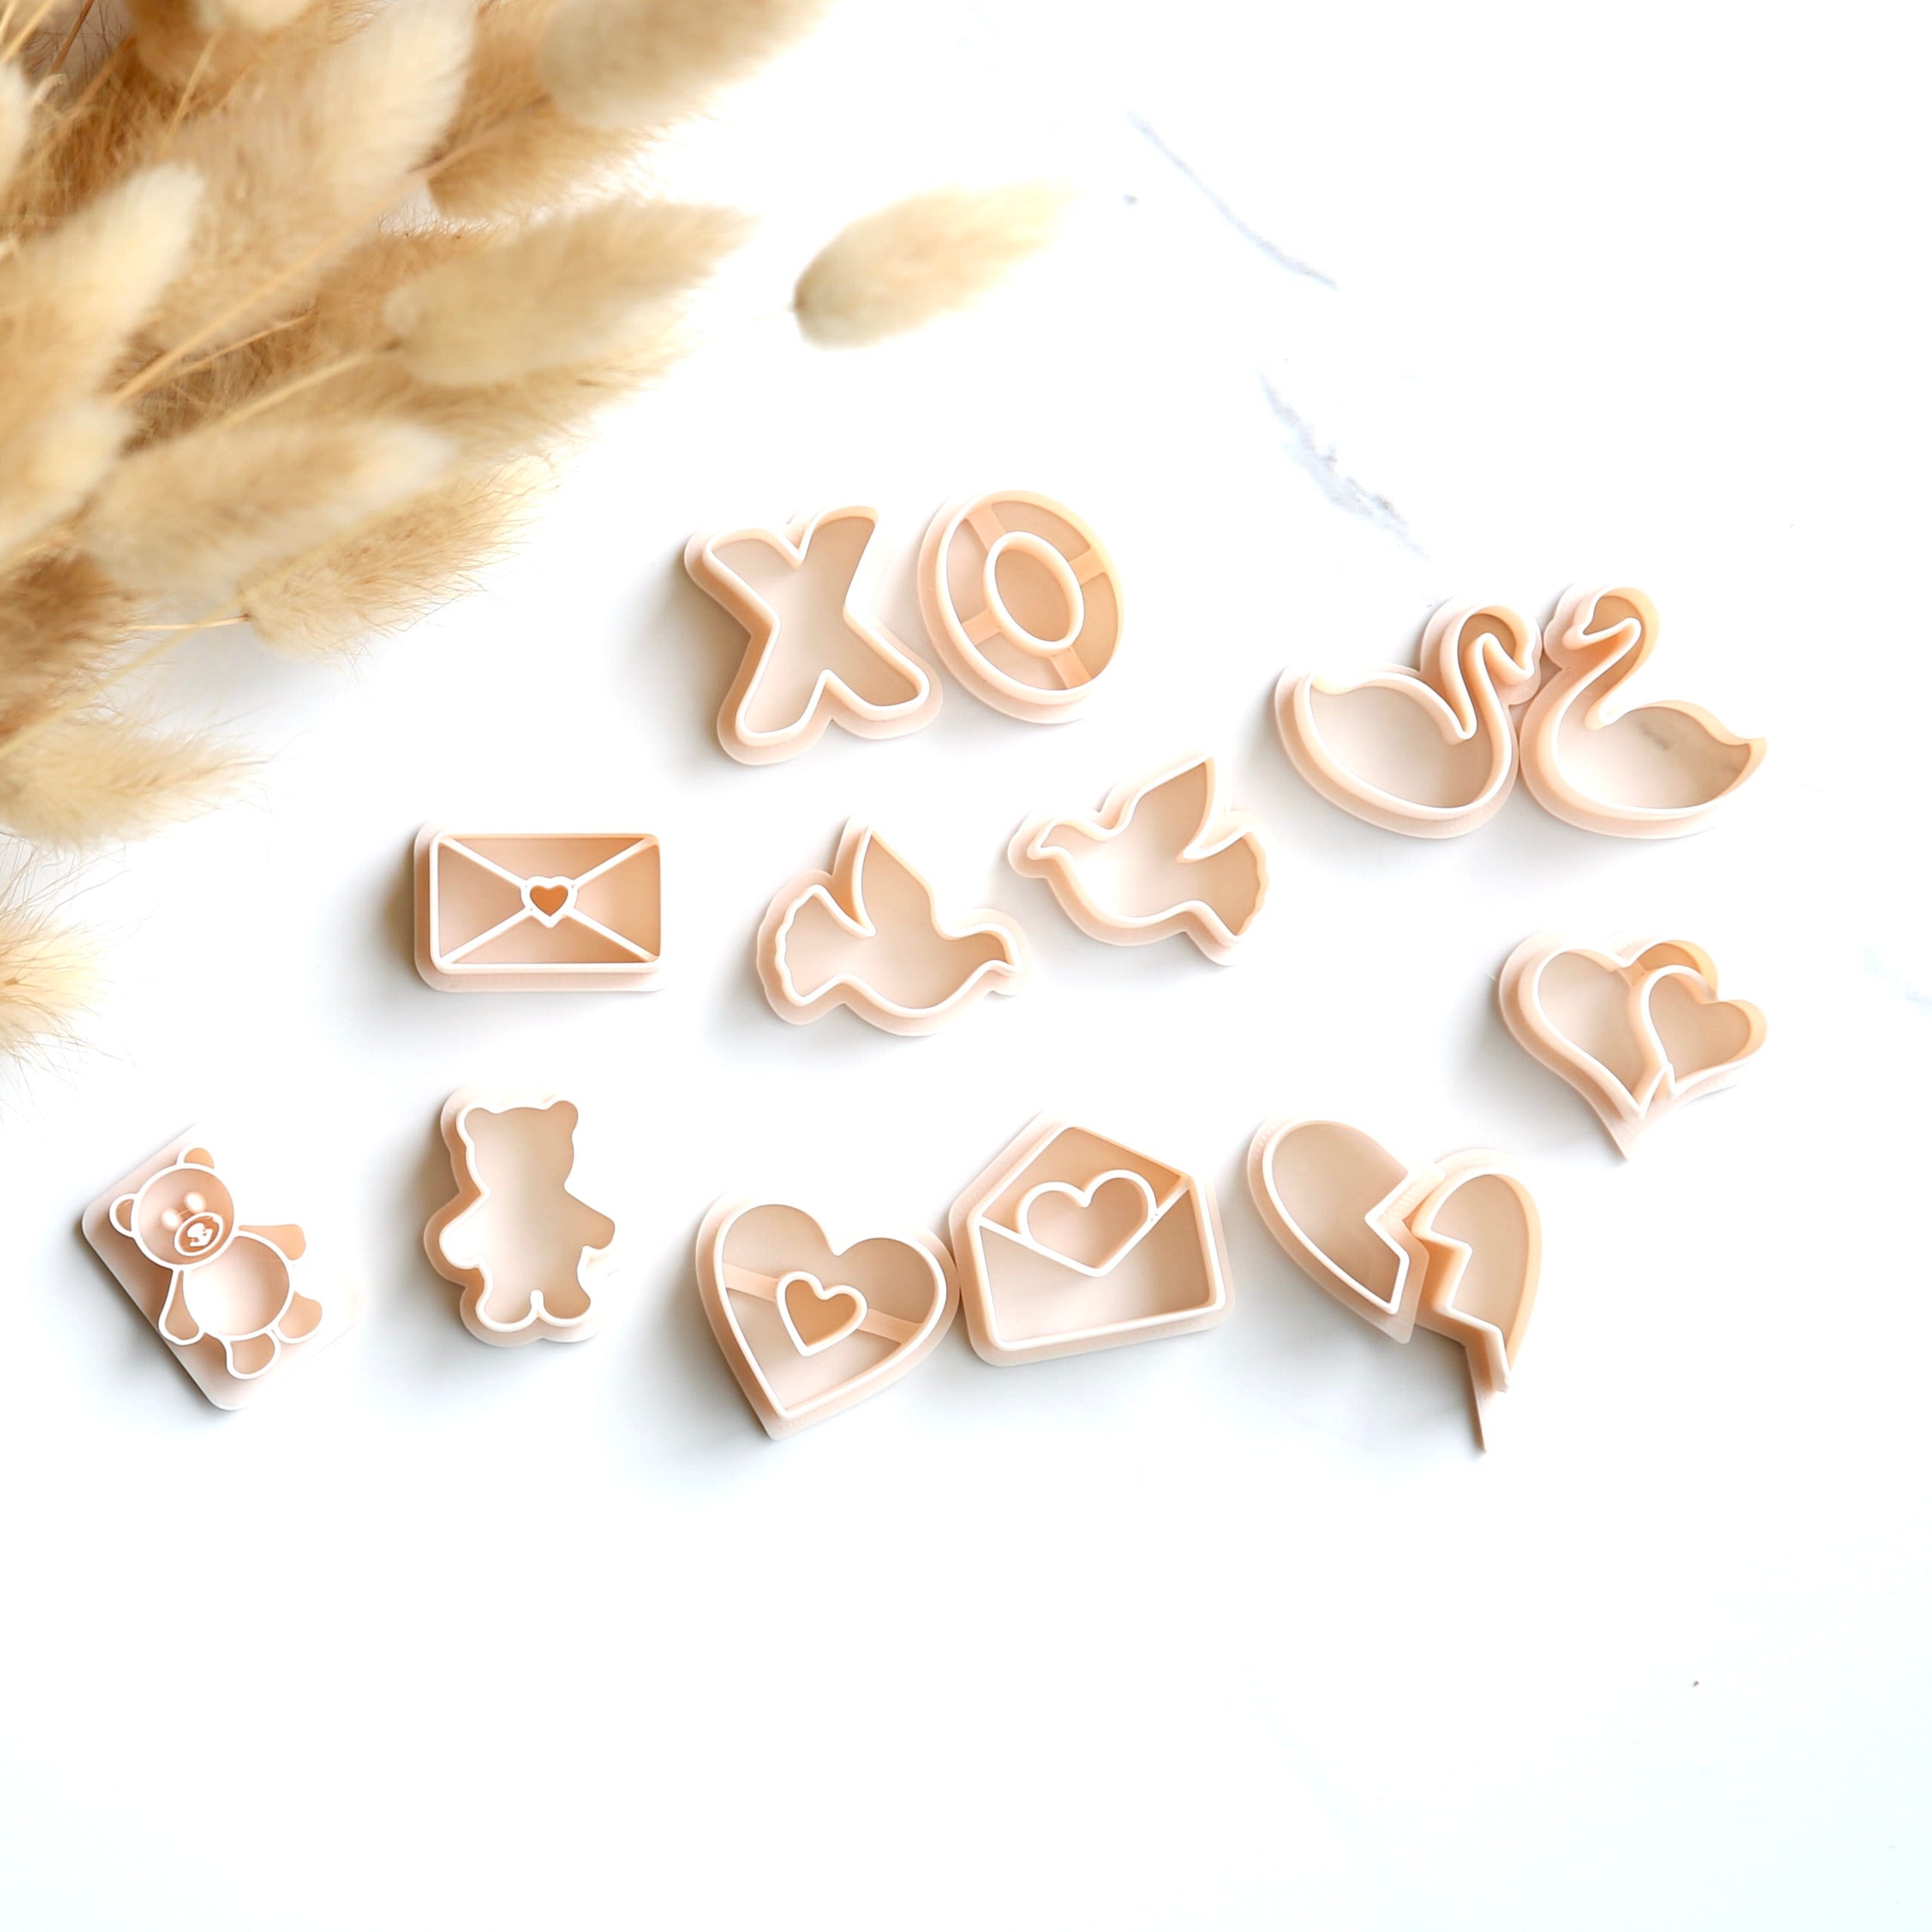 12pcs Polymer Clay Cutters Valentines Day, Valentines Polymer Clay Cutters  For Earrings Making, 12 Shapes Valentines